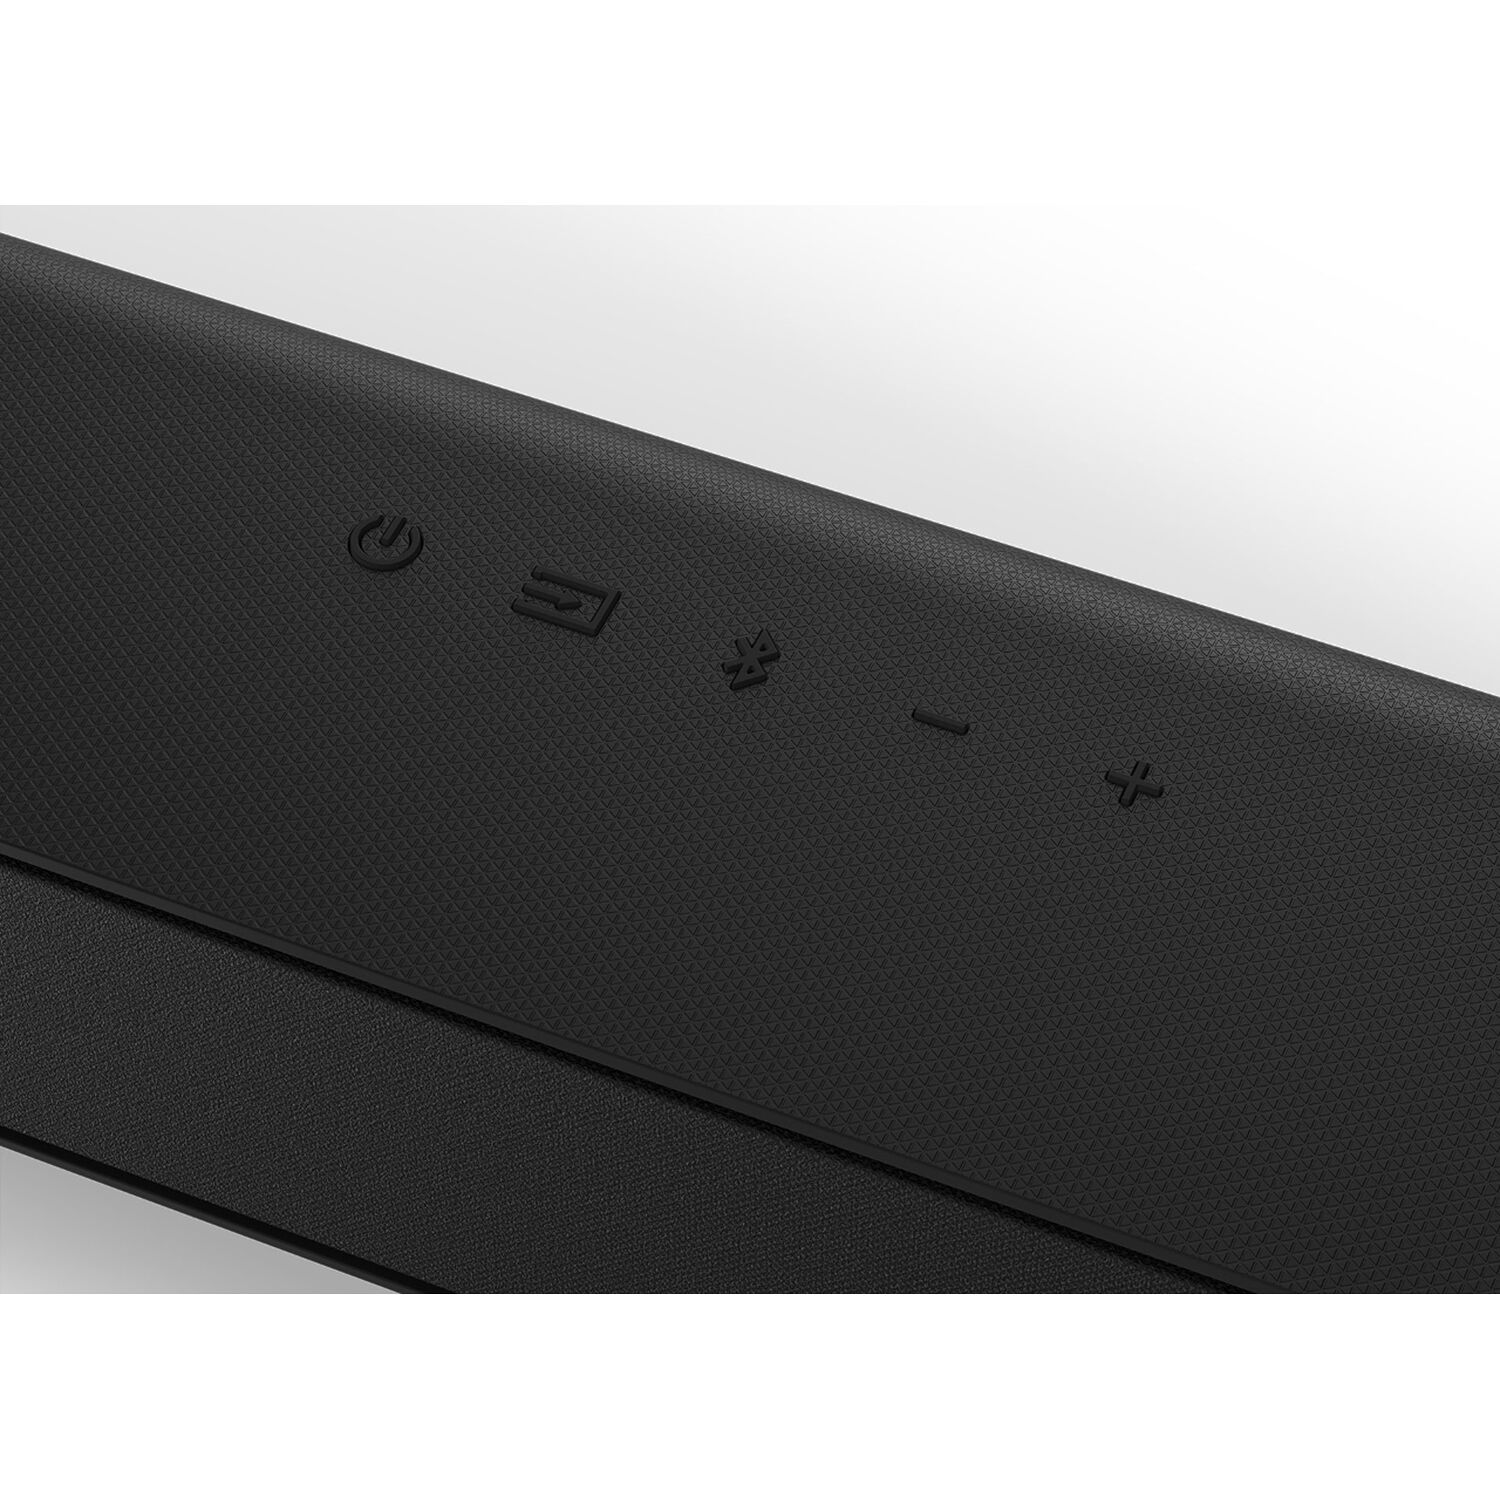 Vizio V21x-J8B-RB V-Series 2.1 Home Theater Sound Bar System with 4.5" Wireless Subwoofer - Certified Refurbished